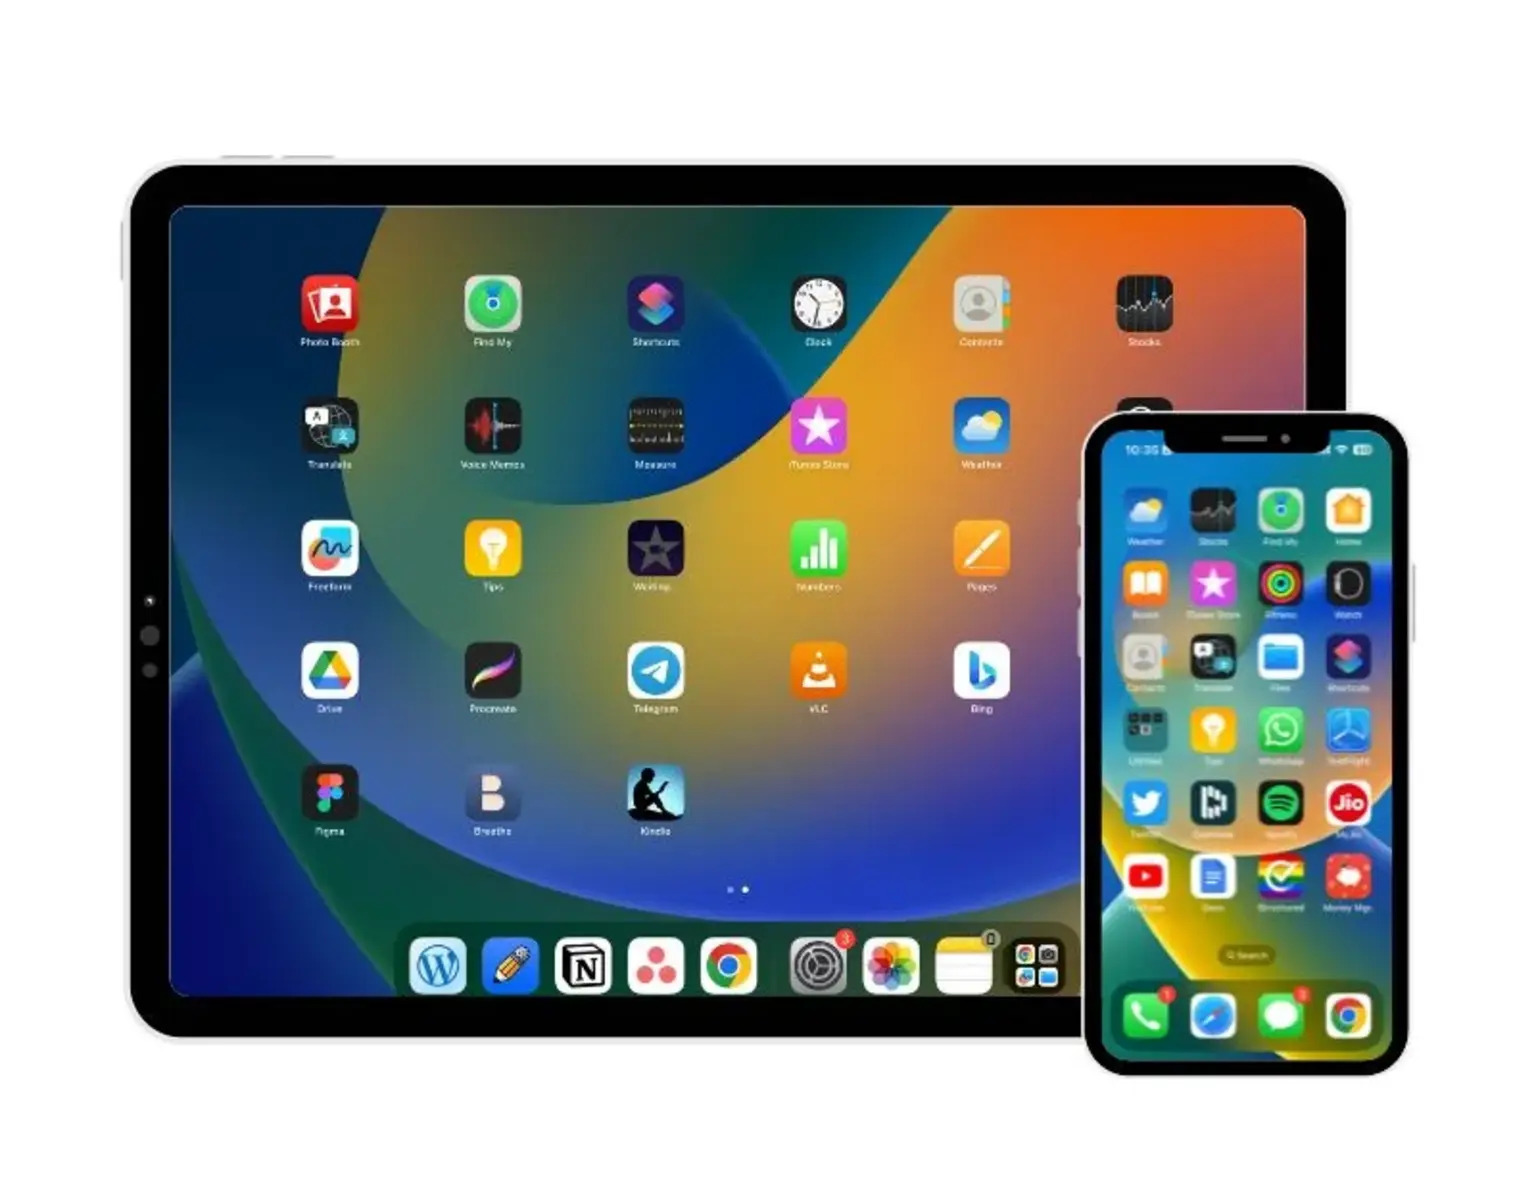 Device Connectivity: Connecting IPhone 10 To IPad Or IPhone